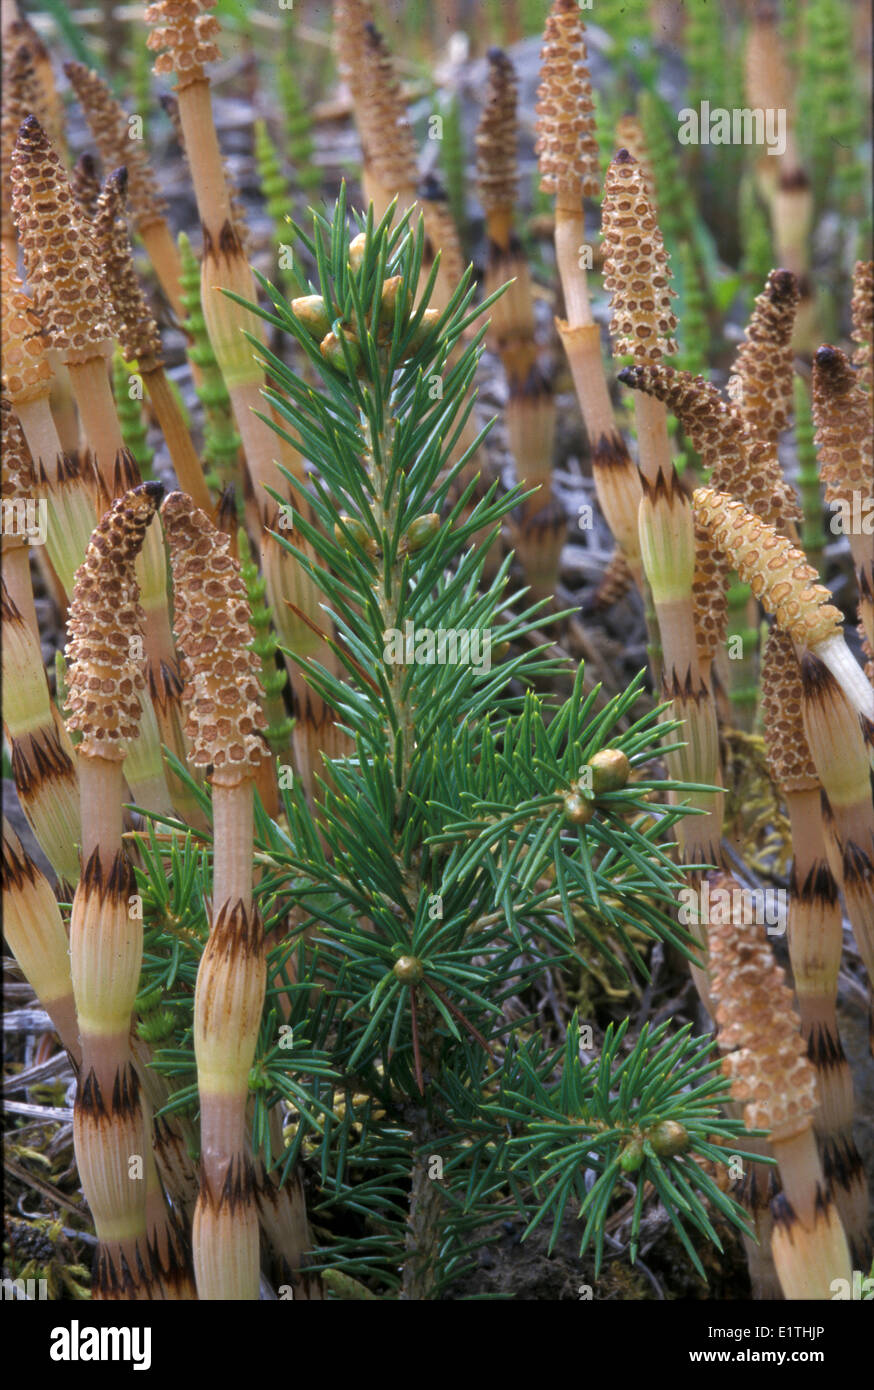 white spruce Picea glauca seedling growing in a cluster horsetail Equisitum sp. plants forest floor in Jasper National Park Stock Photo